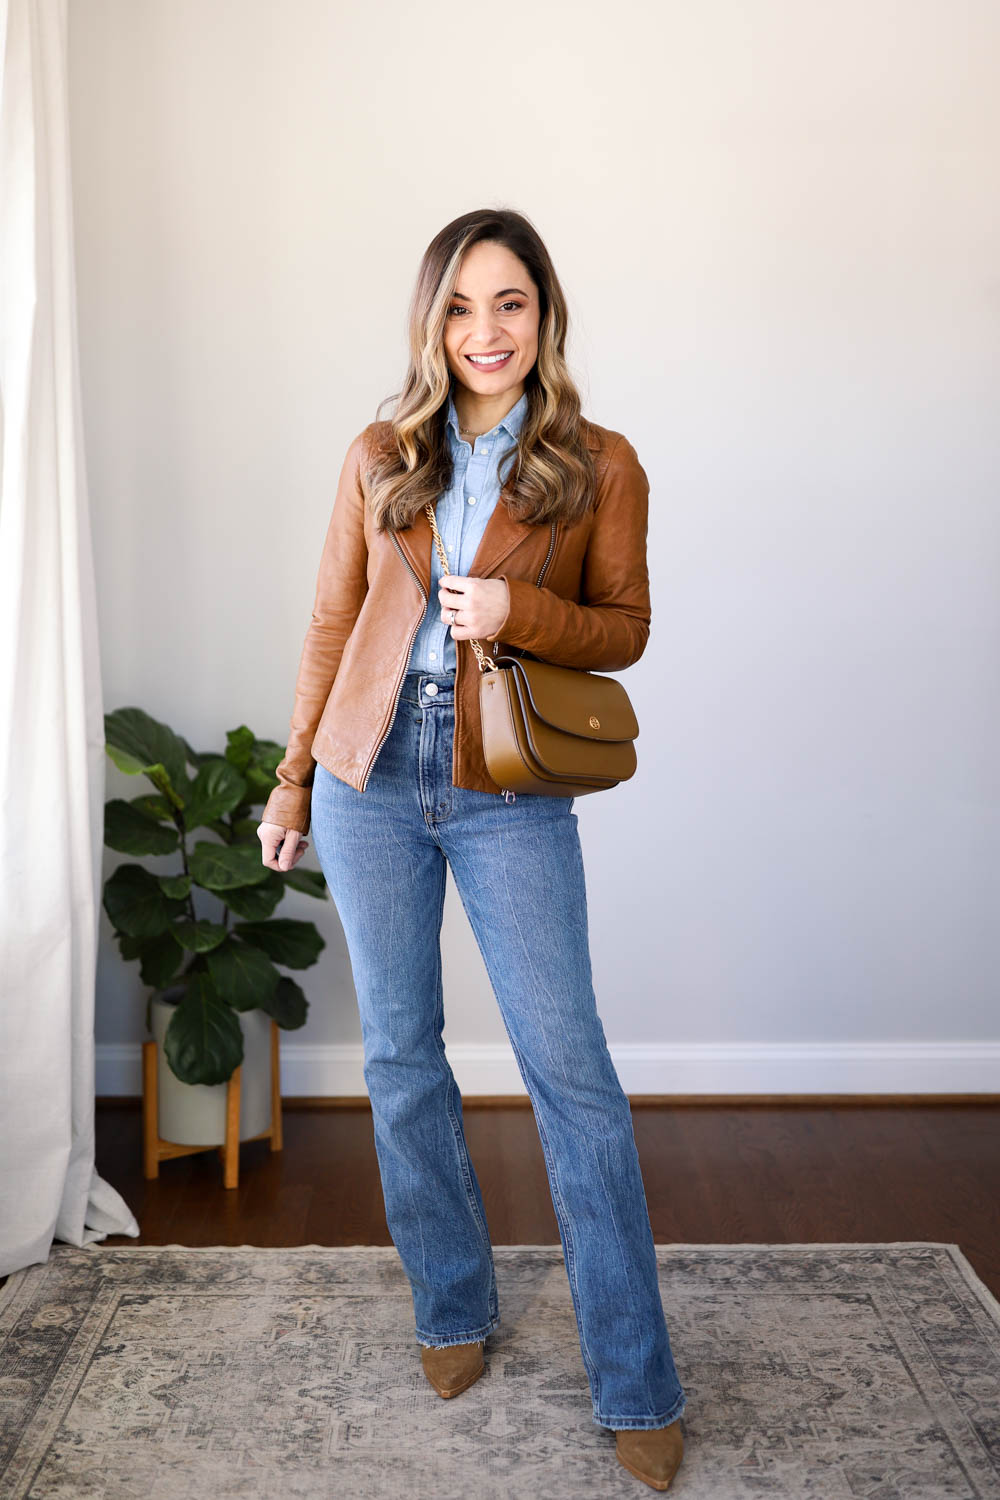 What Shoes to Wear with Flared Jeans? - A guide for Women